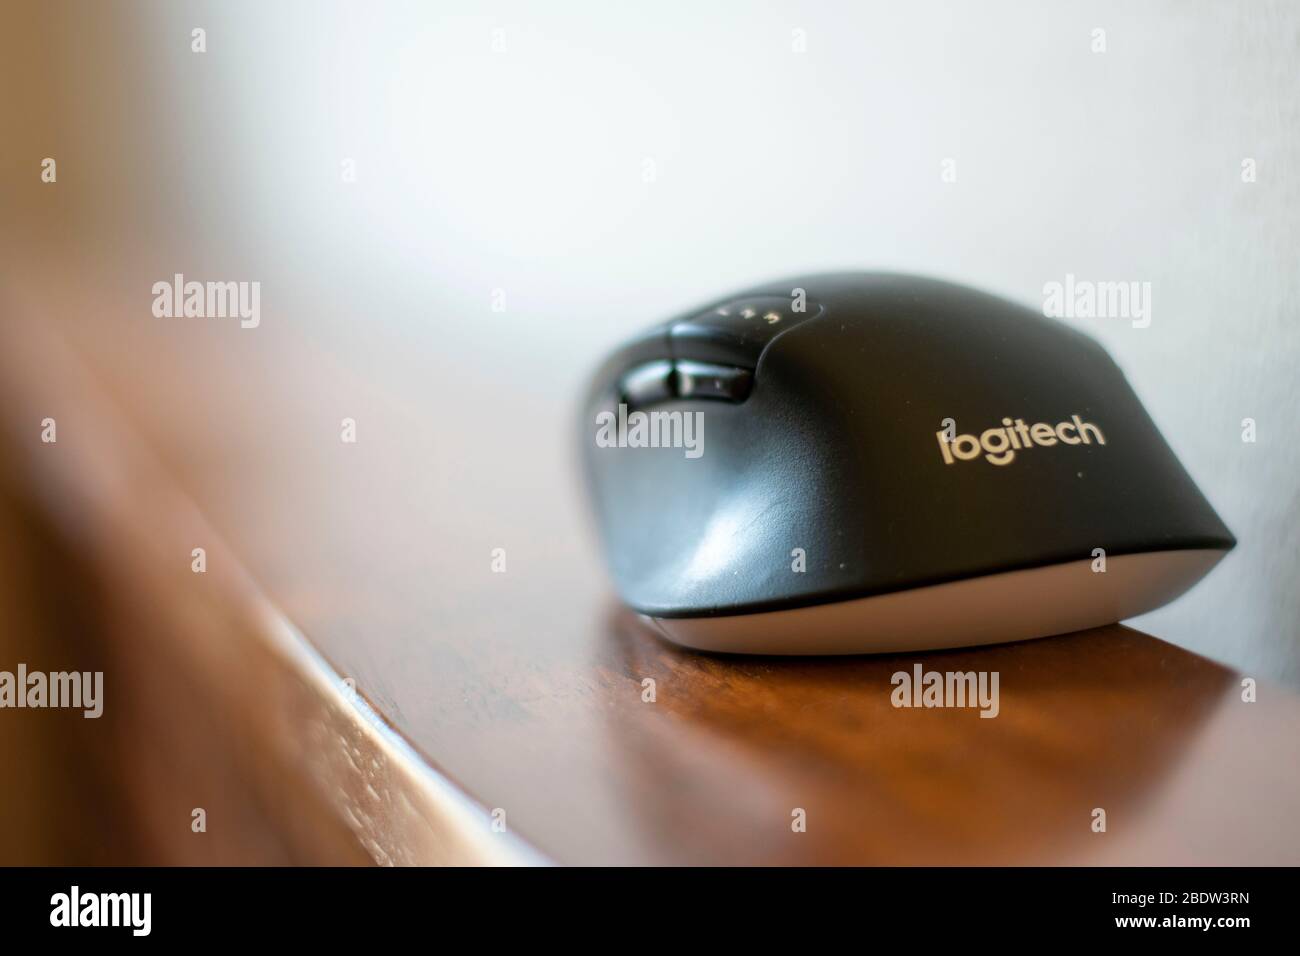 This Logitech wireless mouse is reliable and comfortable to use. Stock Photo